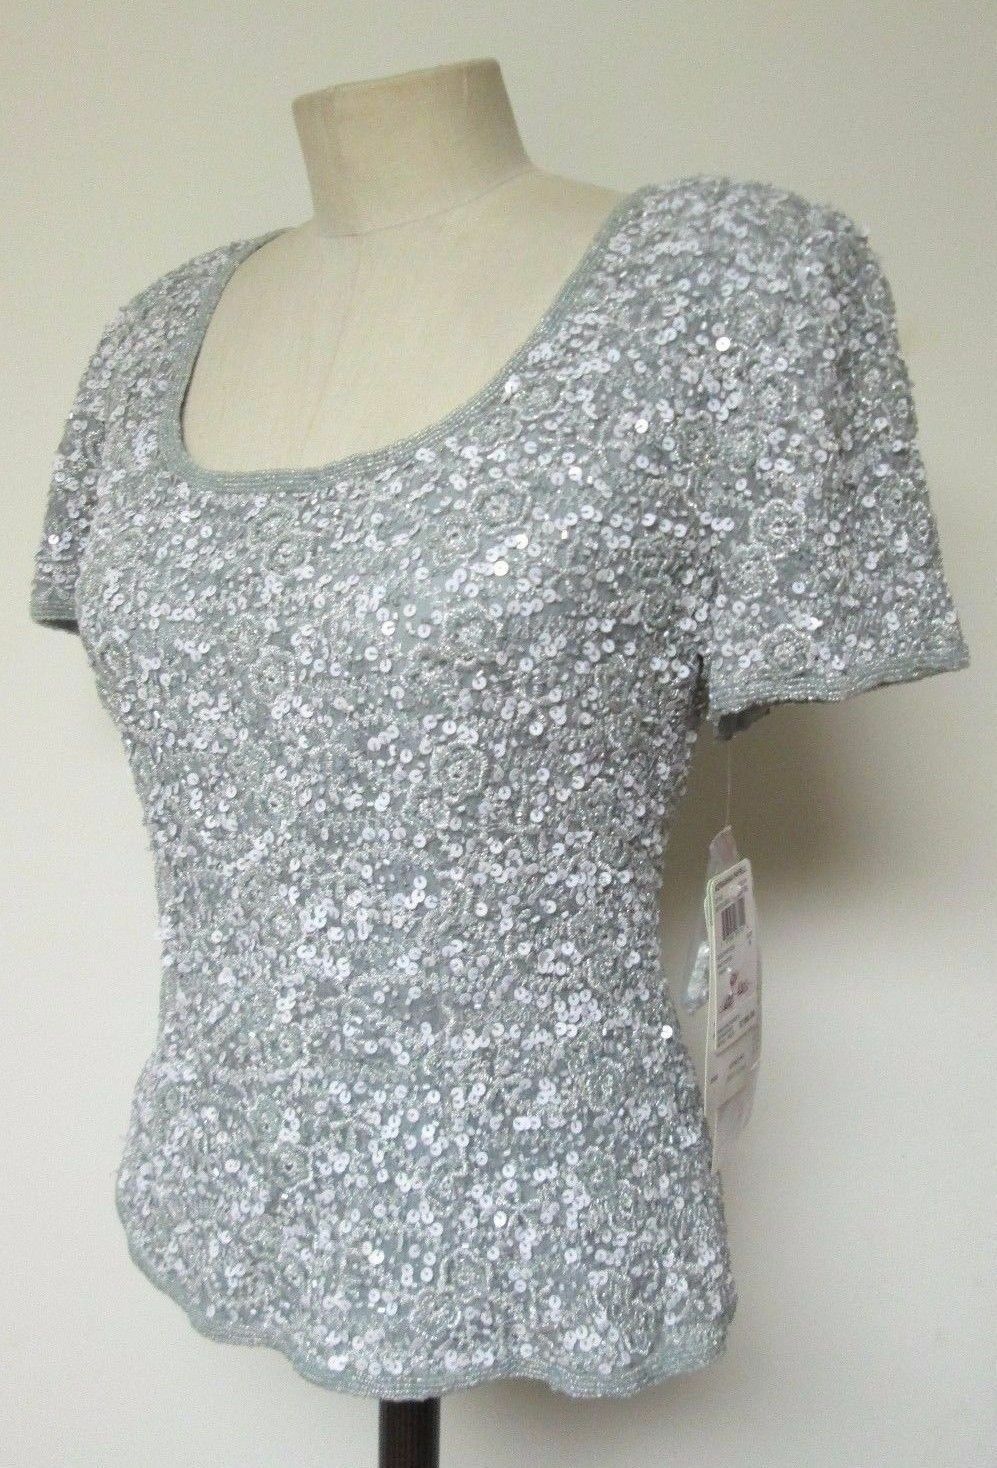 Adrianna Papell Occasions Silver Beaded Sequin Silk Top Sz 8 Nwt